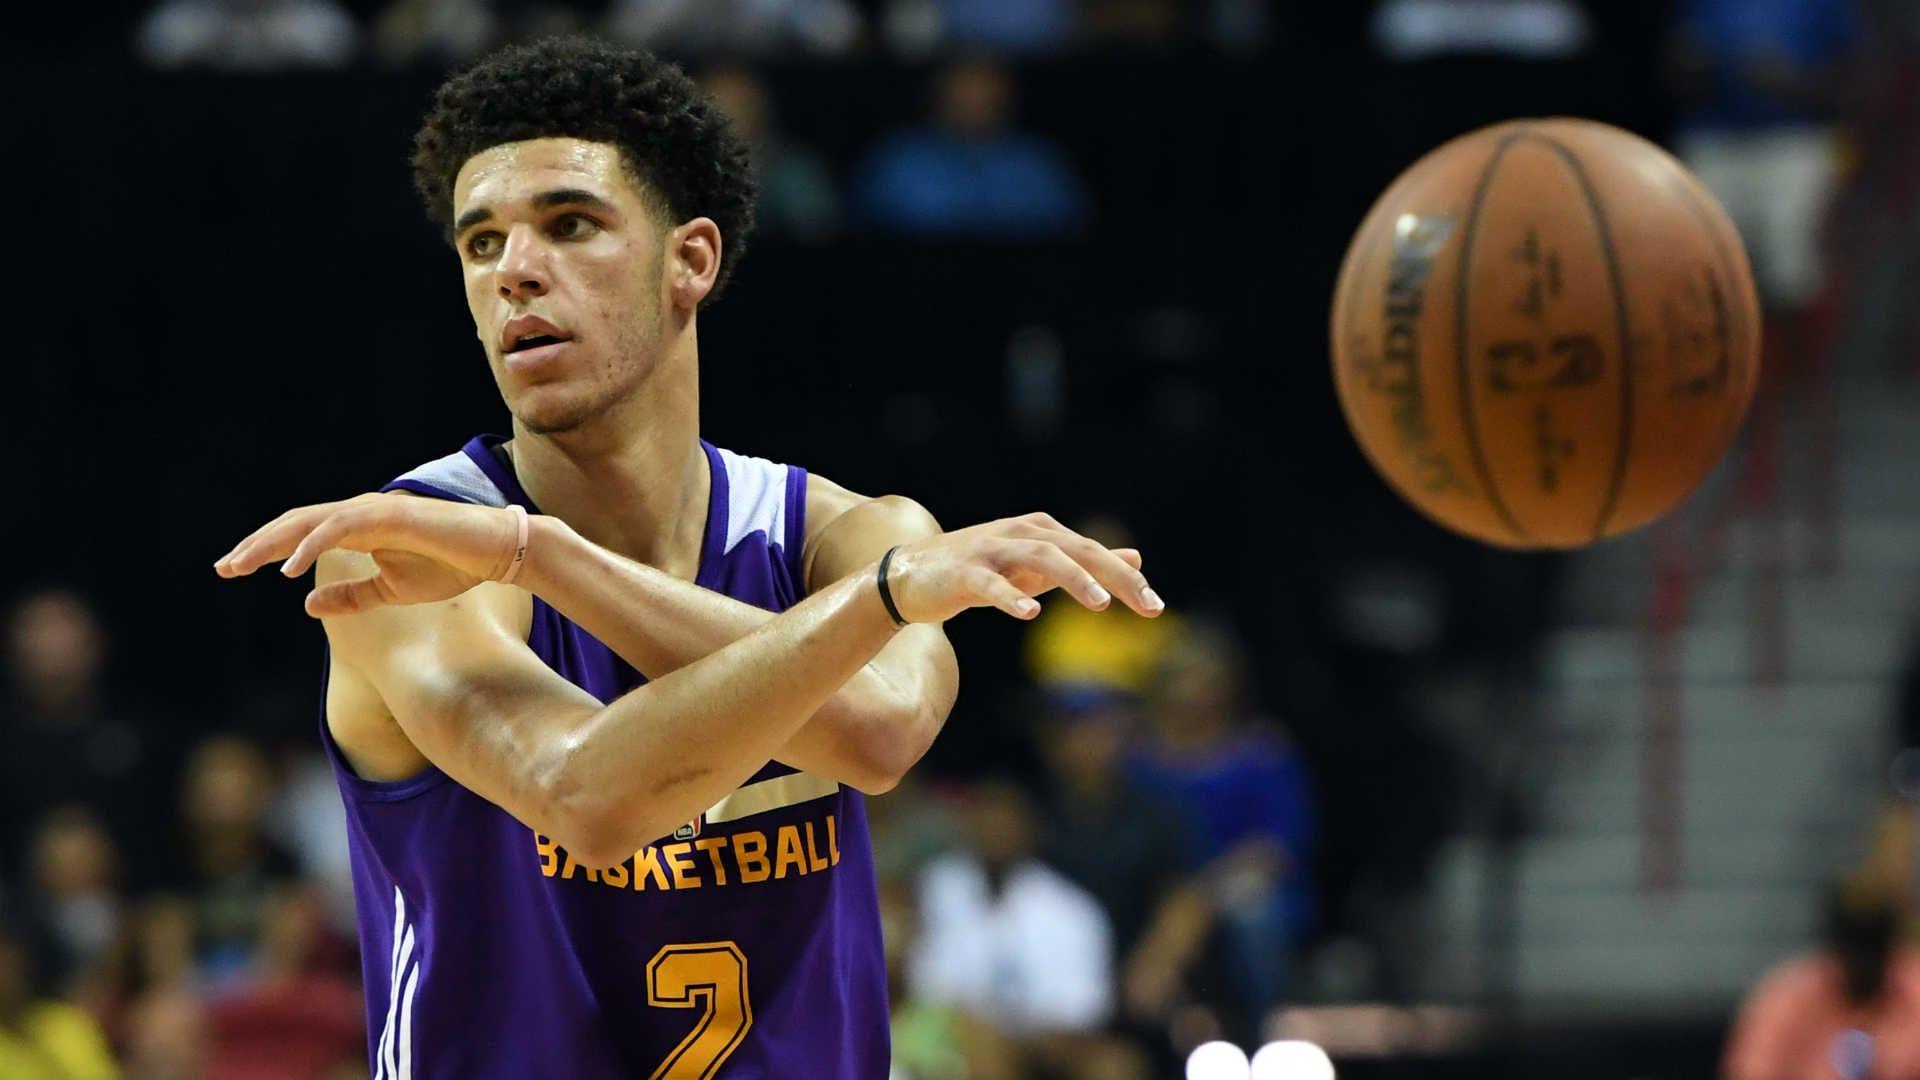 Lakers coach Walton says players will 'come after' Lonzo Ball